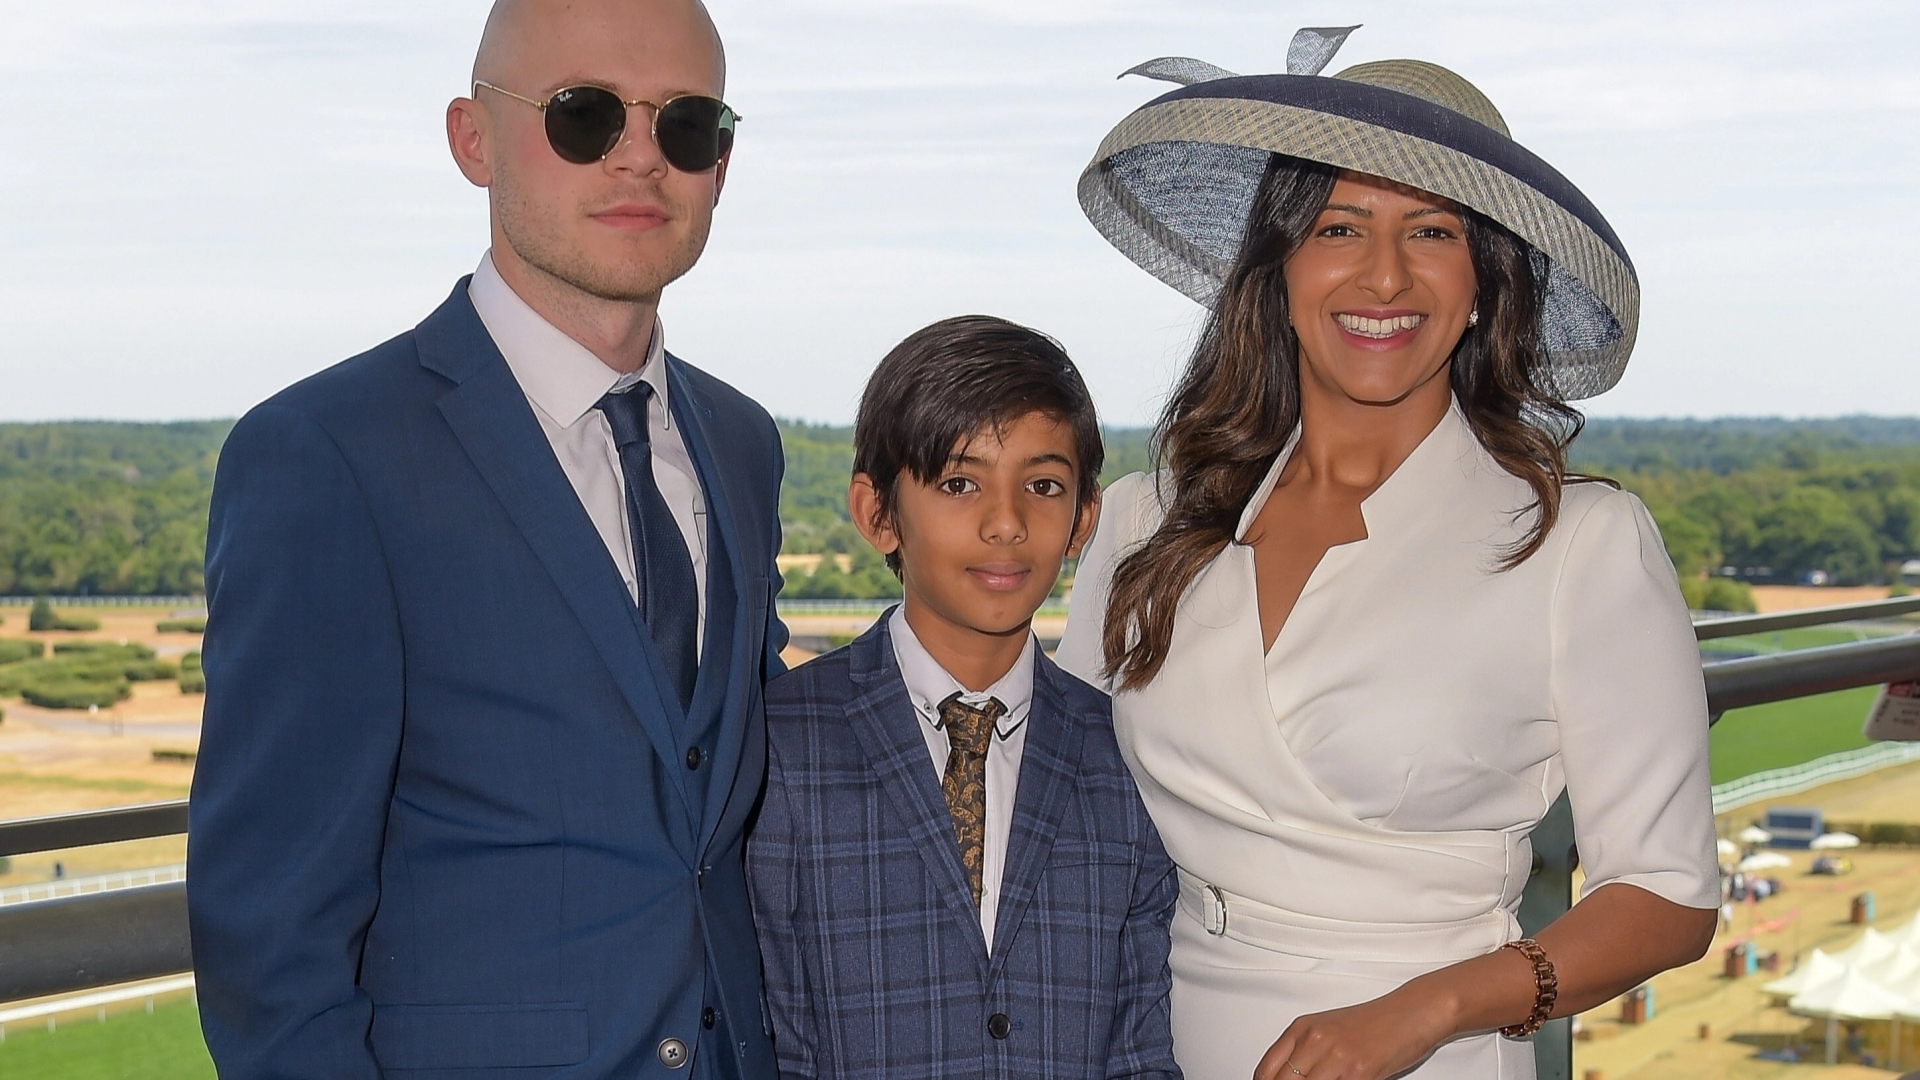 Ranvir Singh of Good Morning Britain poses with her boyfriend Louis and her rare-seen child for the first ever